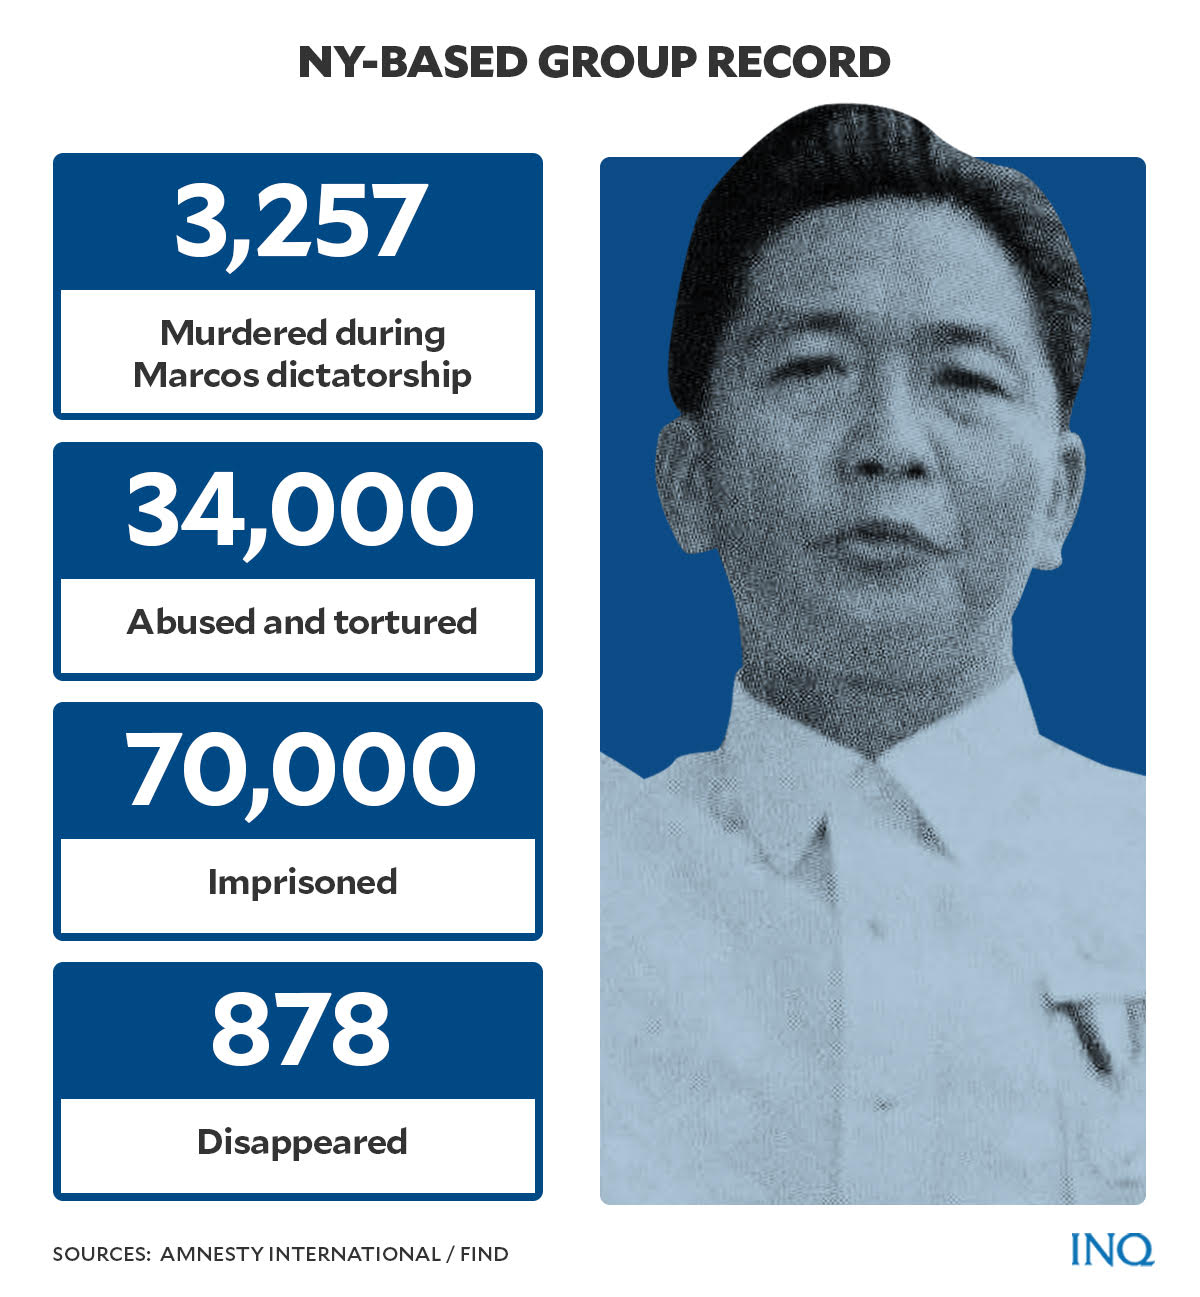 ny-based group record of Marcos